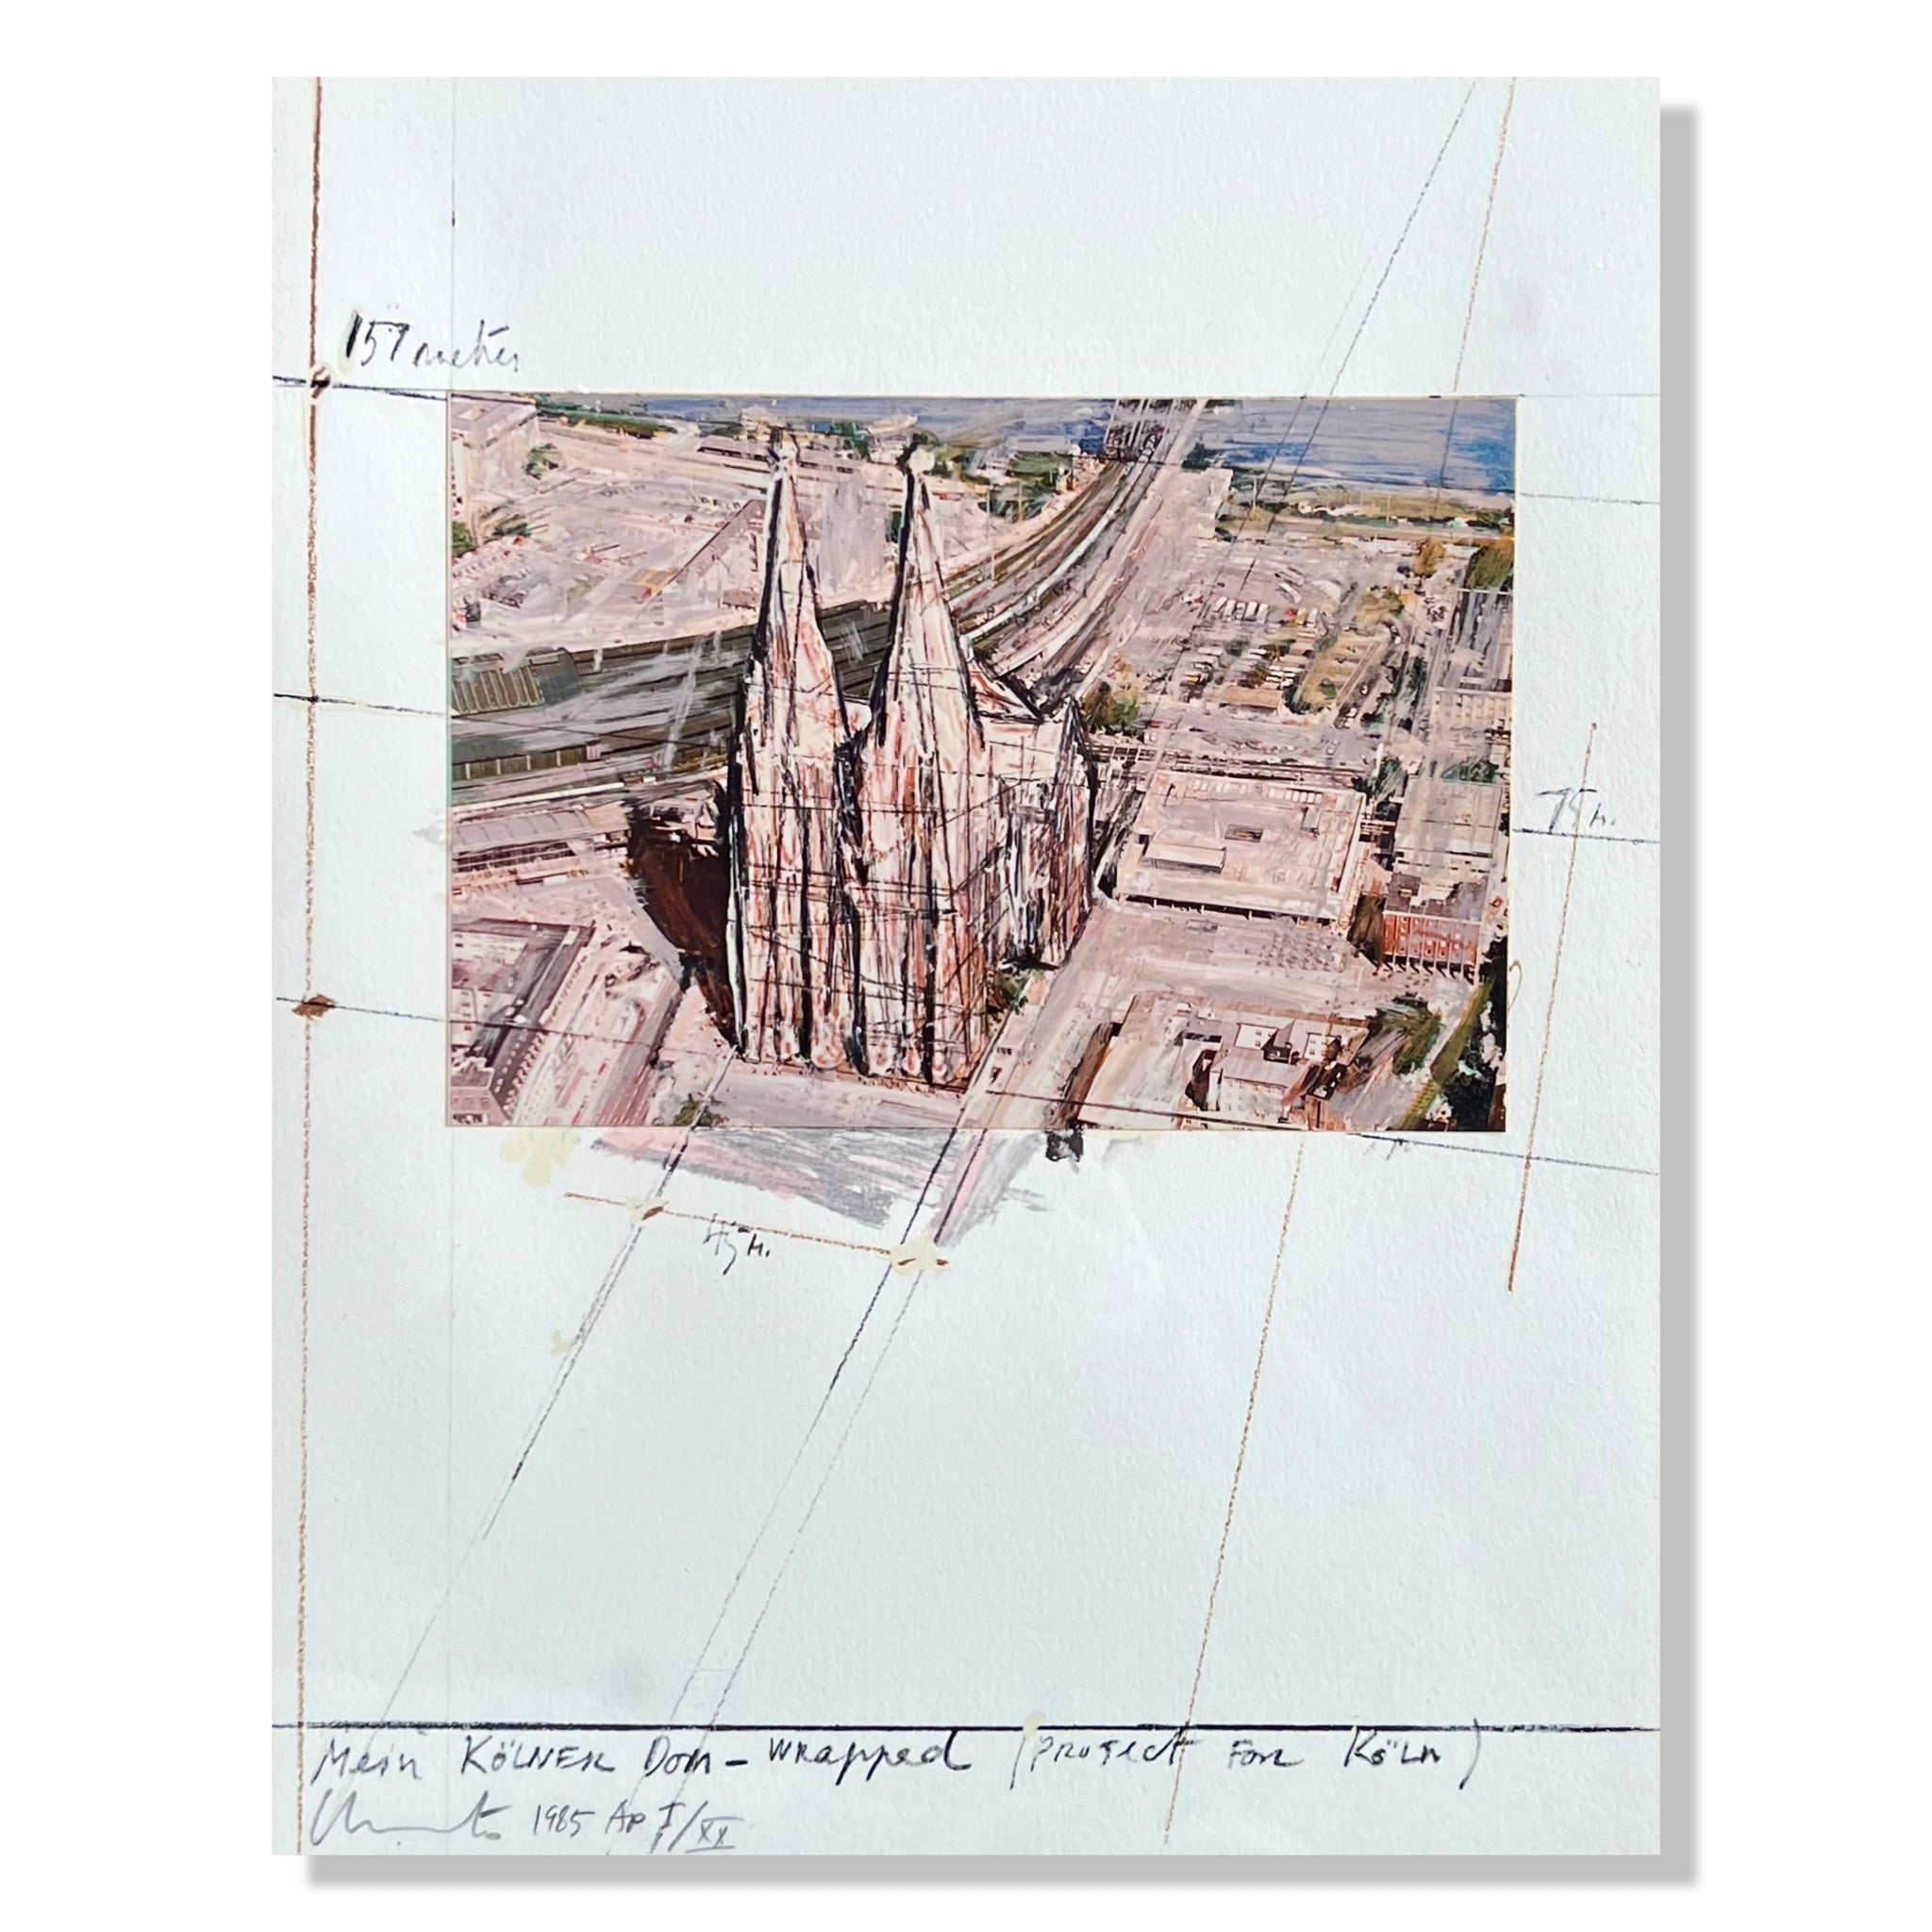 Christo and Jeanne-Claude - Mein Kölner Dom, Wrapped, Project for Cologne